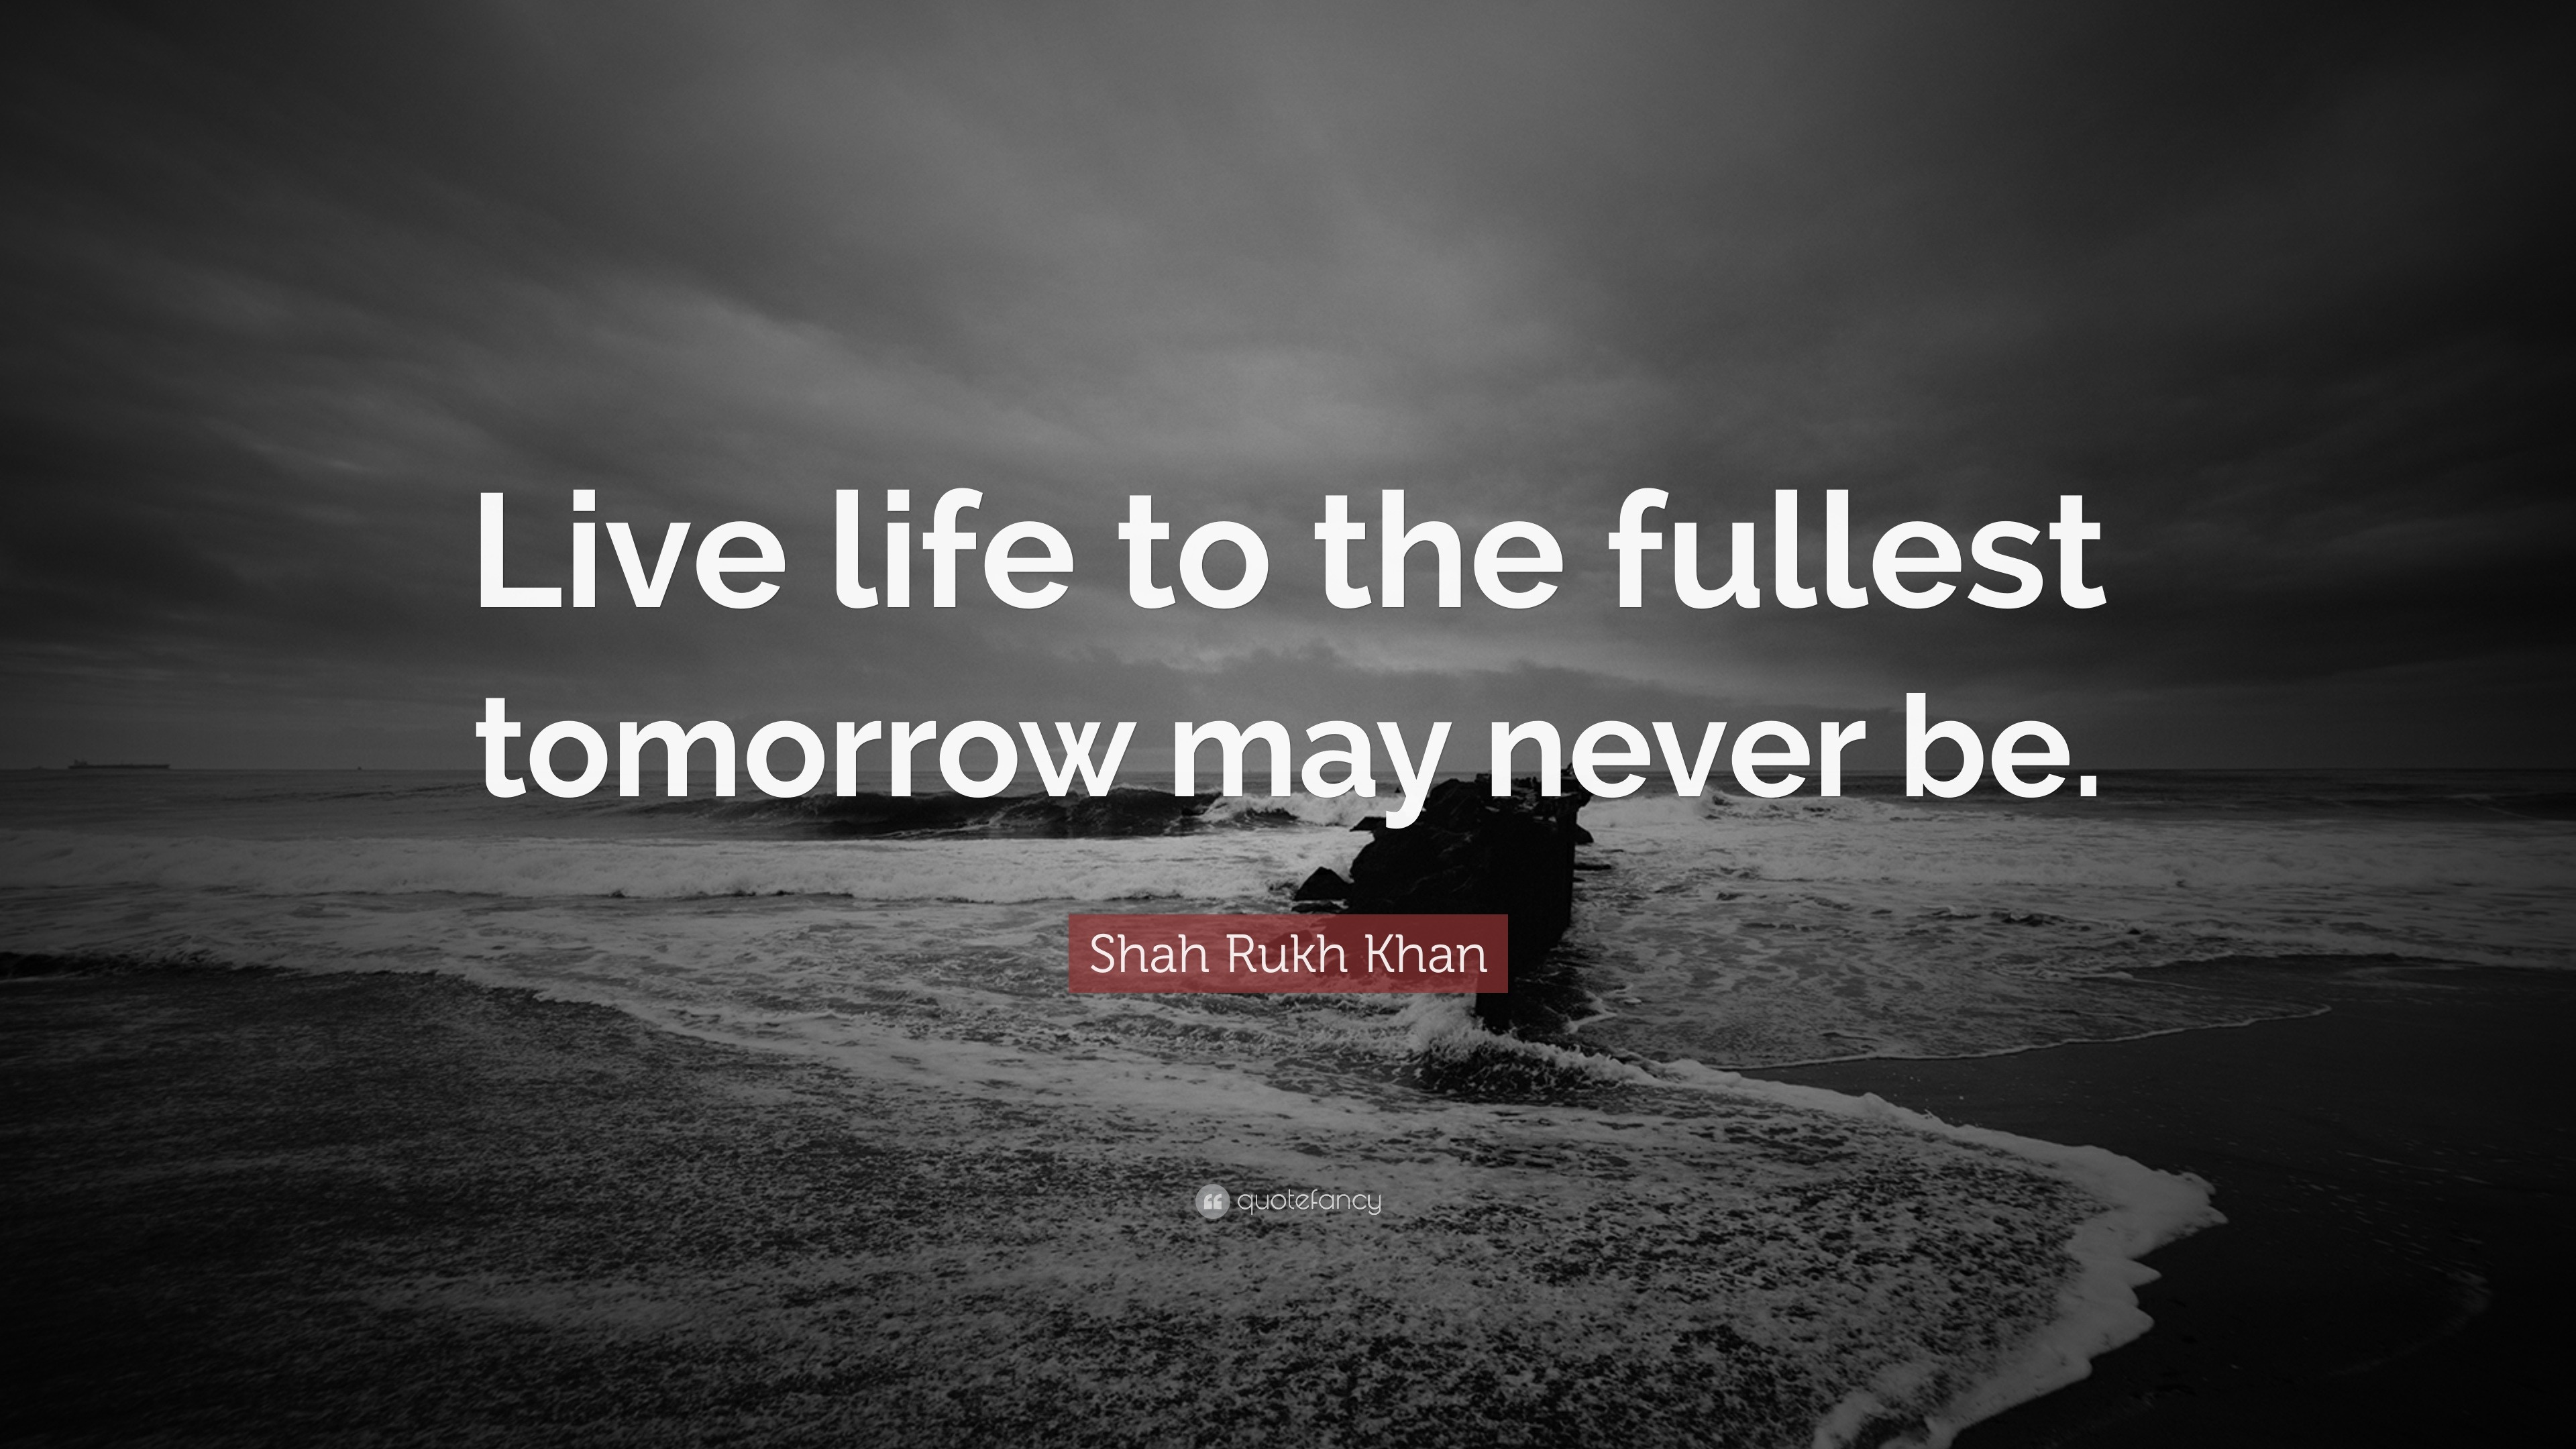 Shah Rukh Khan Quote: “Live life to the fullest tomorrow may never be.”